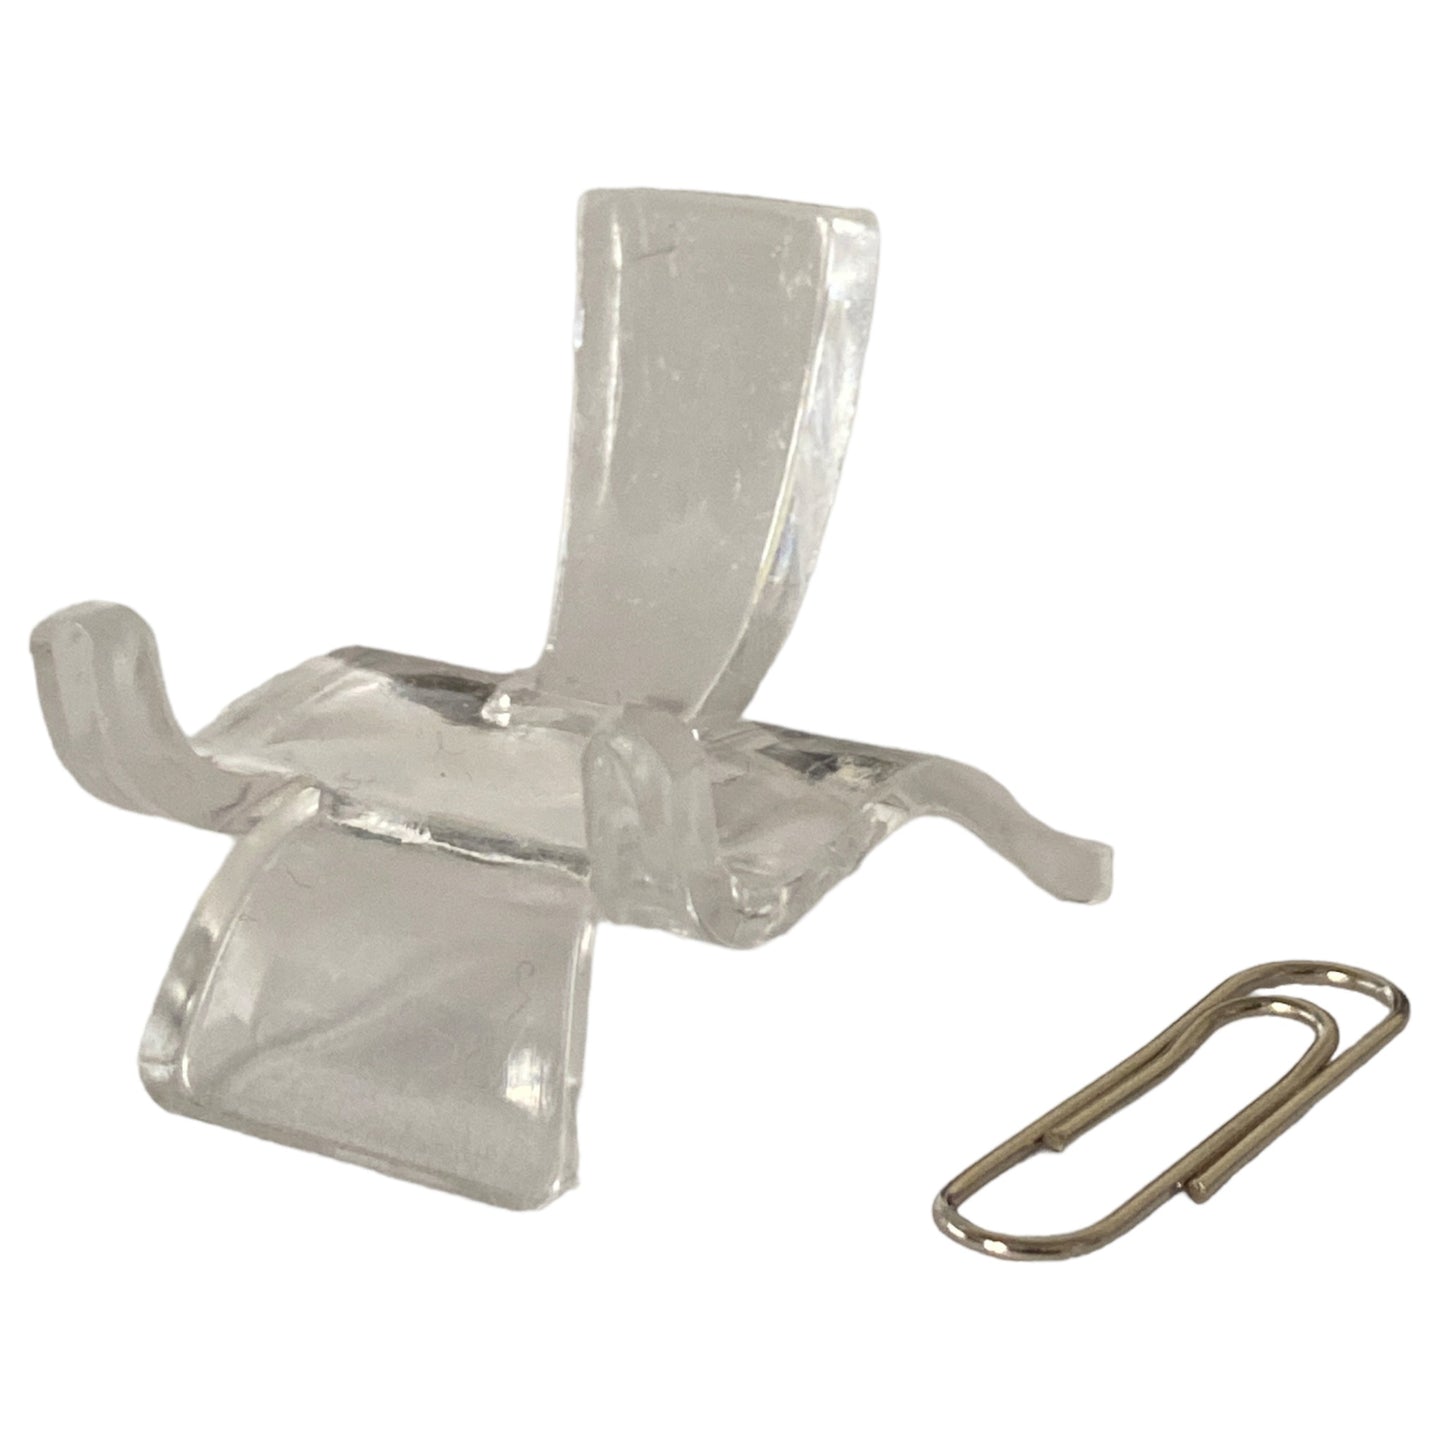 Small Chair Stand 30mm - Clear ACRYLIC DISPLAY STAND - China - NEW323